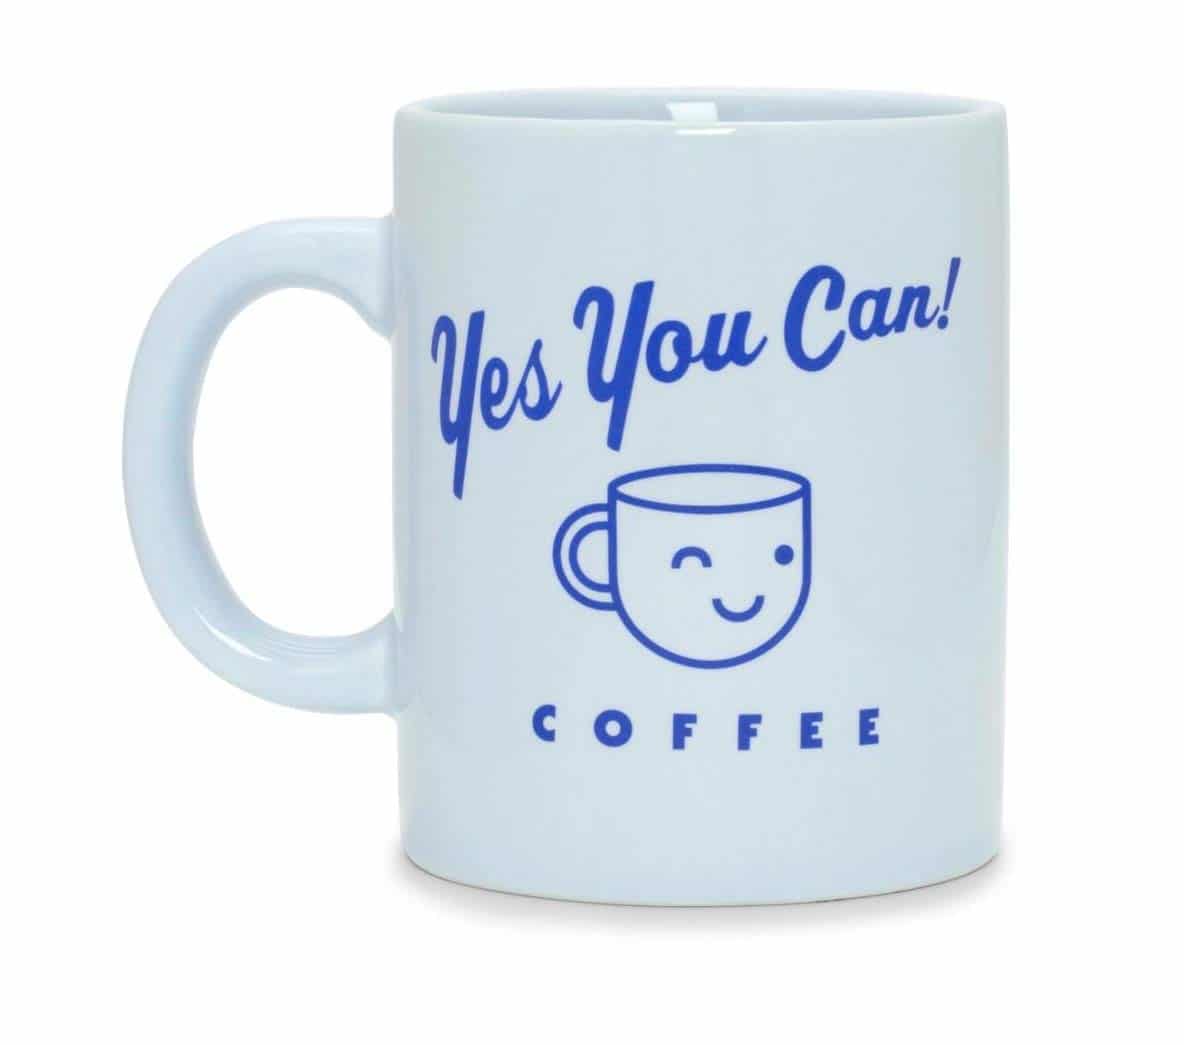 Gifts For Coworker 2022: Yes You Can Coffee Mug 2022